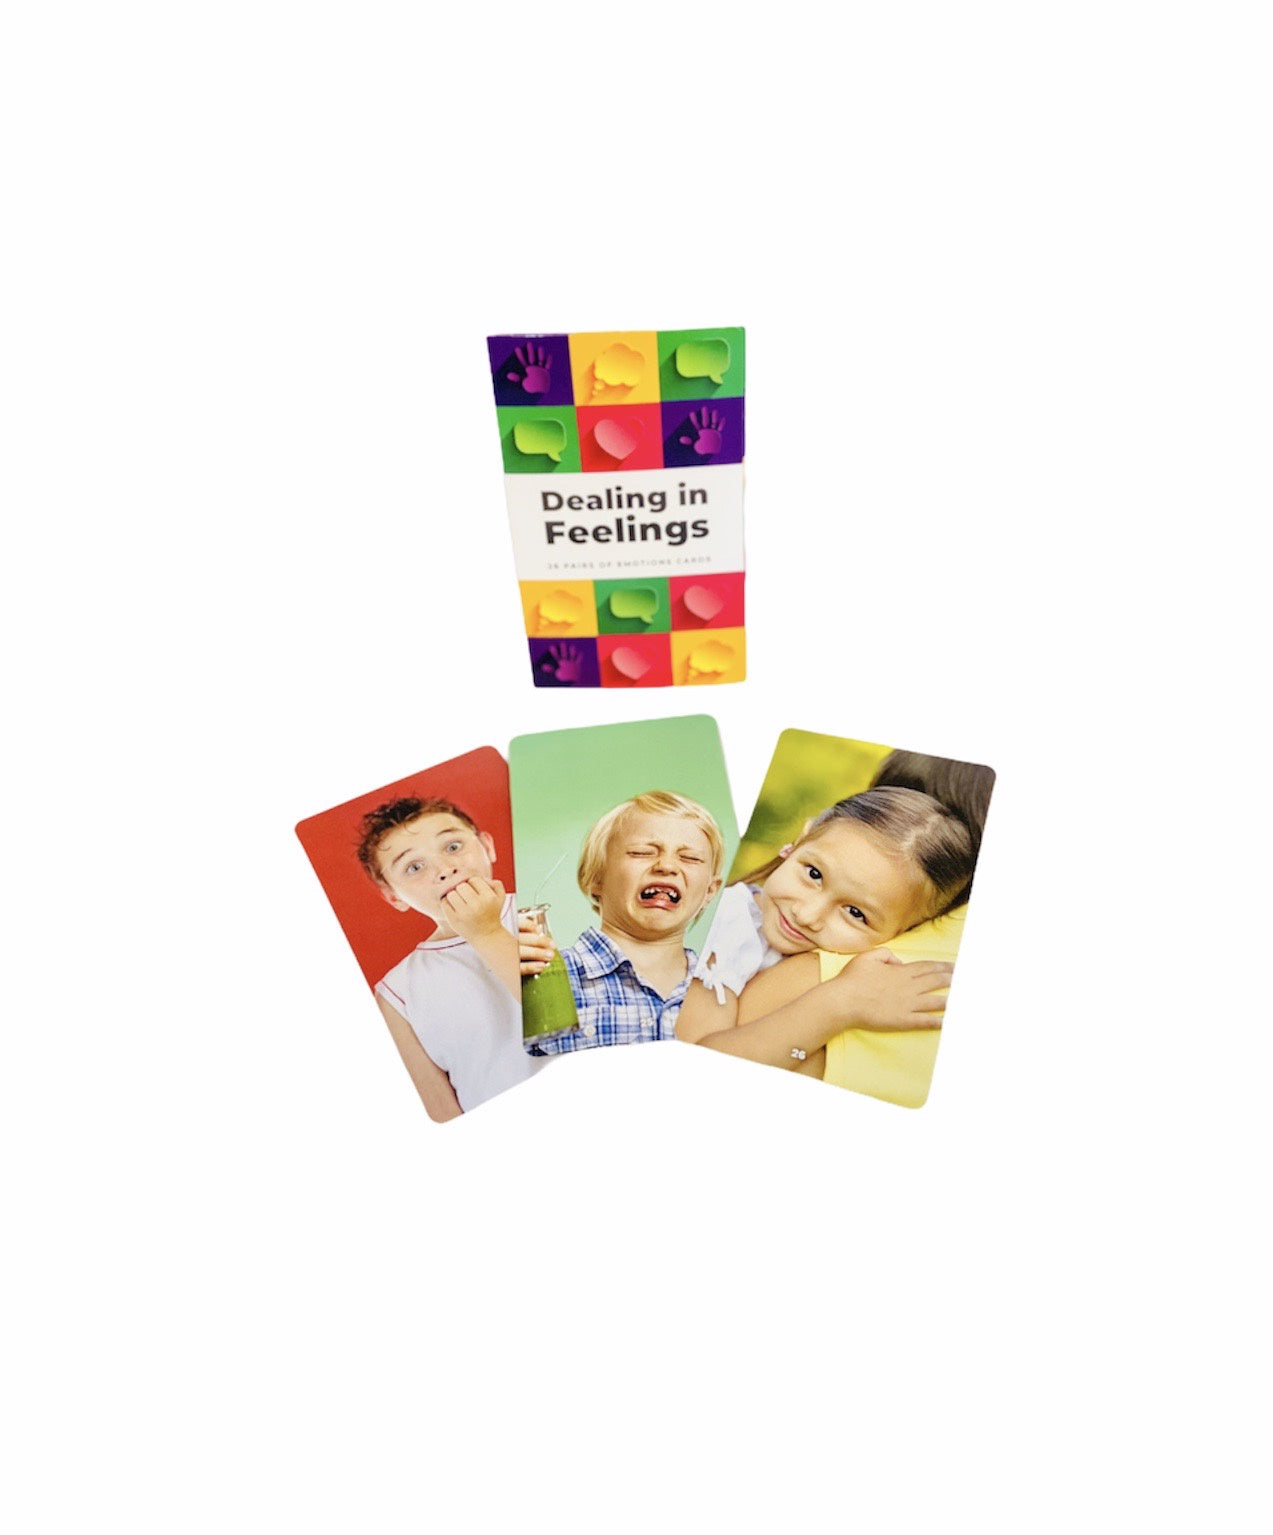 Dealing in Feelings Cards packet with 3 cards laid out in front on white background